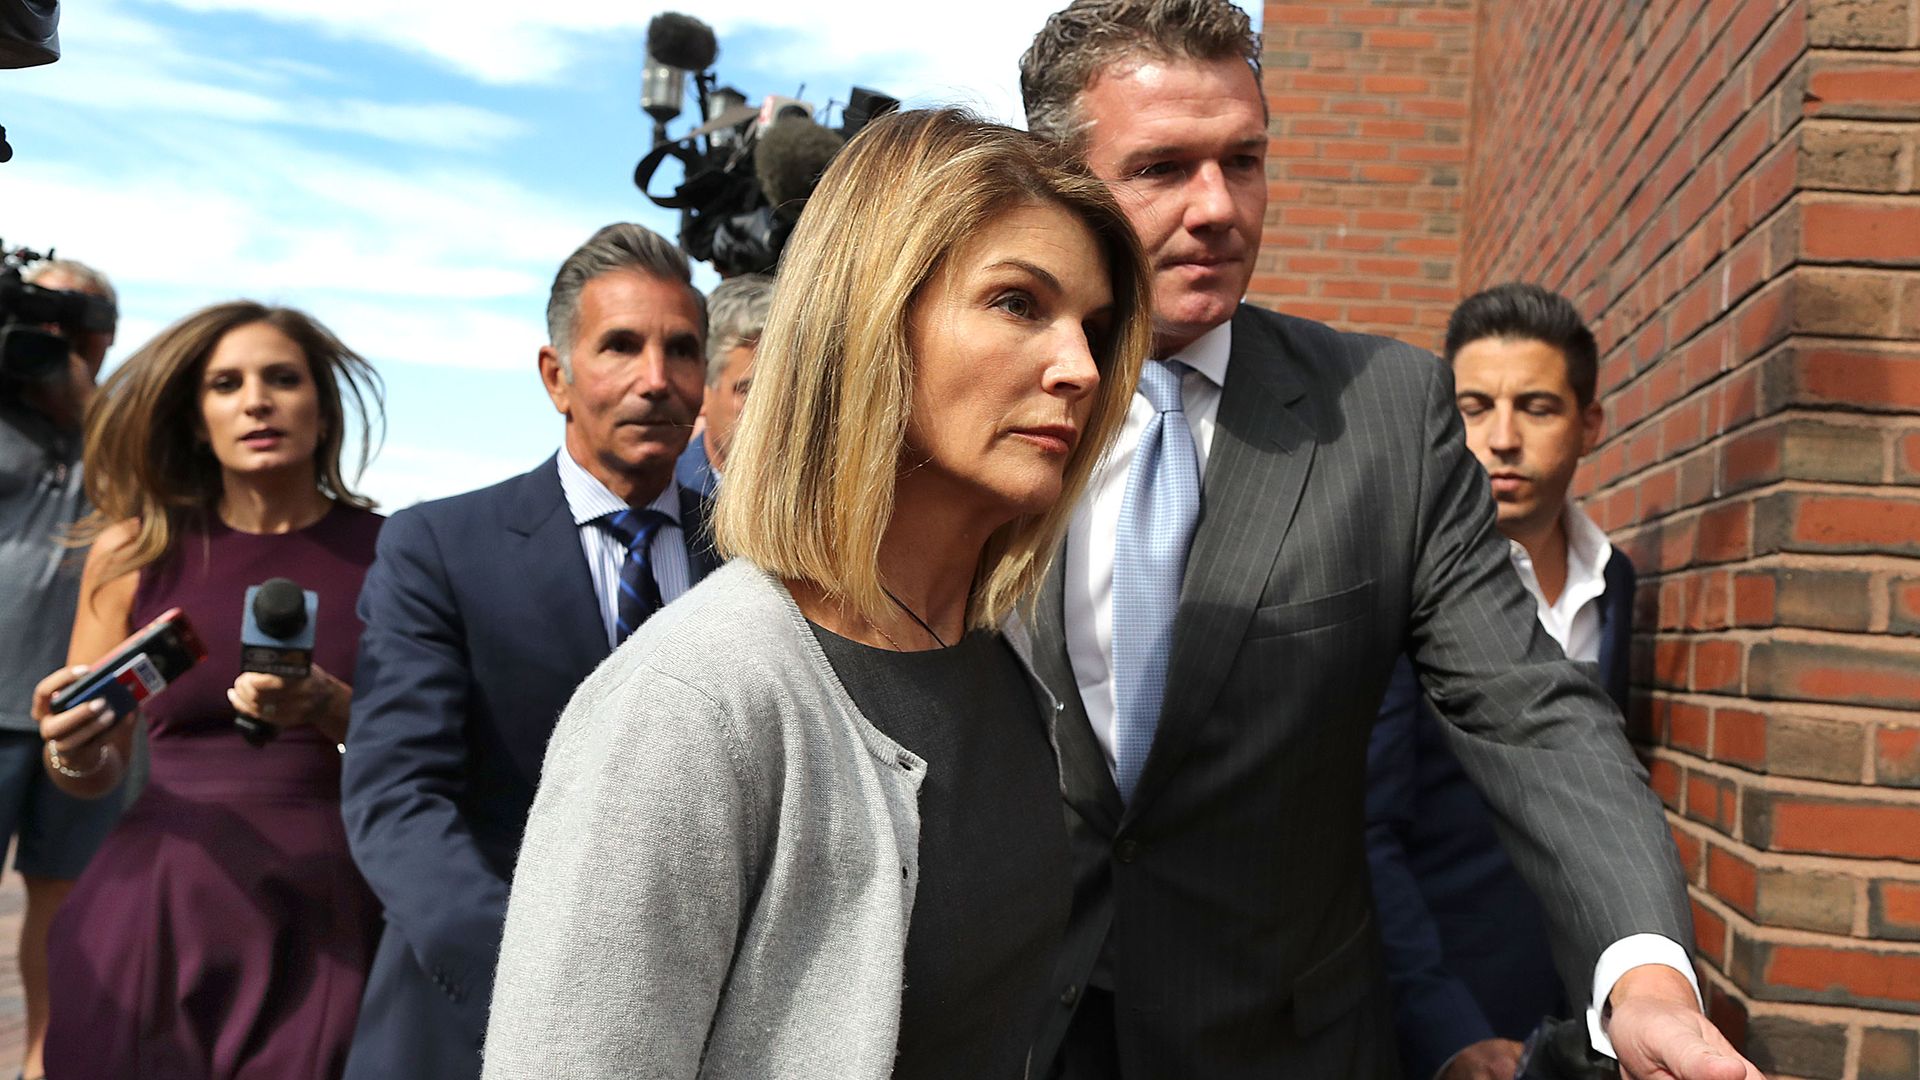 Loughlin and her husband Mossimo Giannulli, behind her at left, leave the John Joseph Moakley United States Courthouse in Boston on Aug. 27, 2019. 